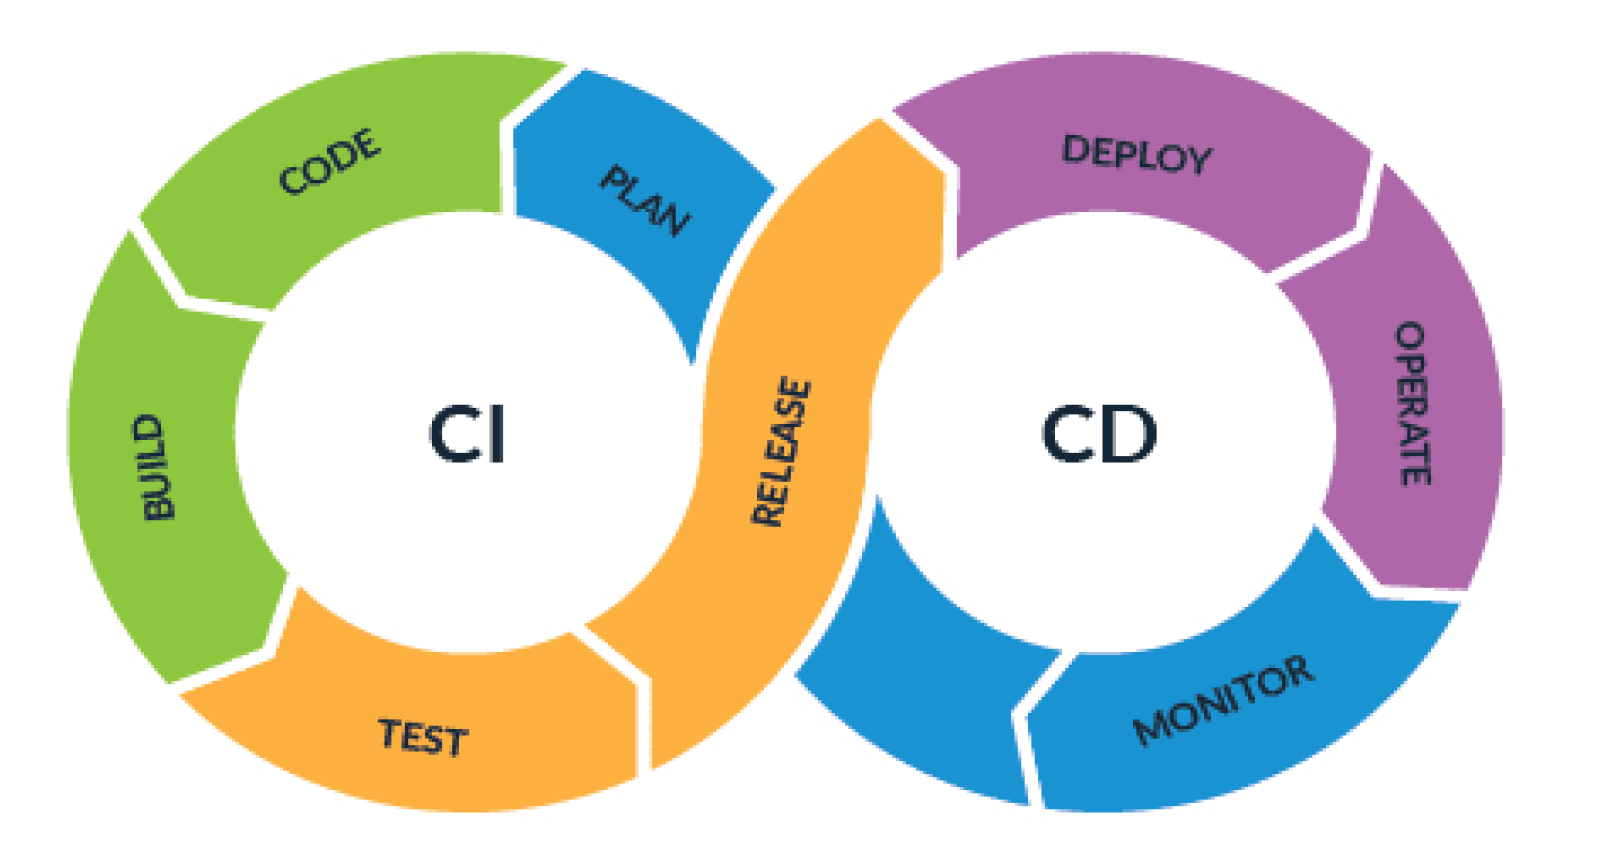 Continuous Integration, Continuous Delivery, CI, CD, Agile methodologies, like Scrum or Kanban